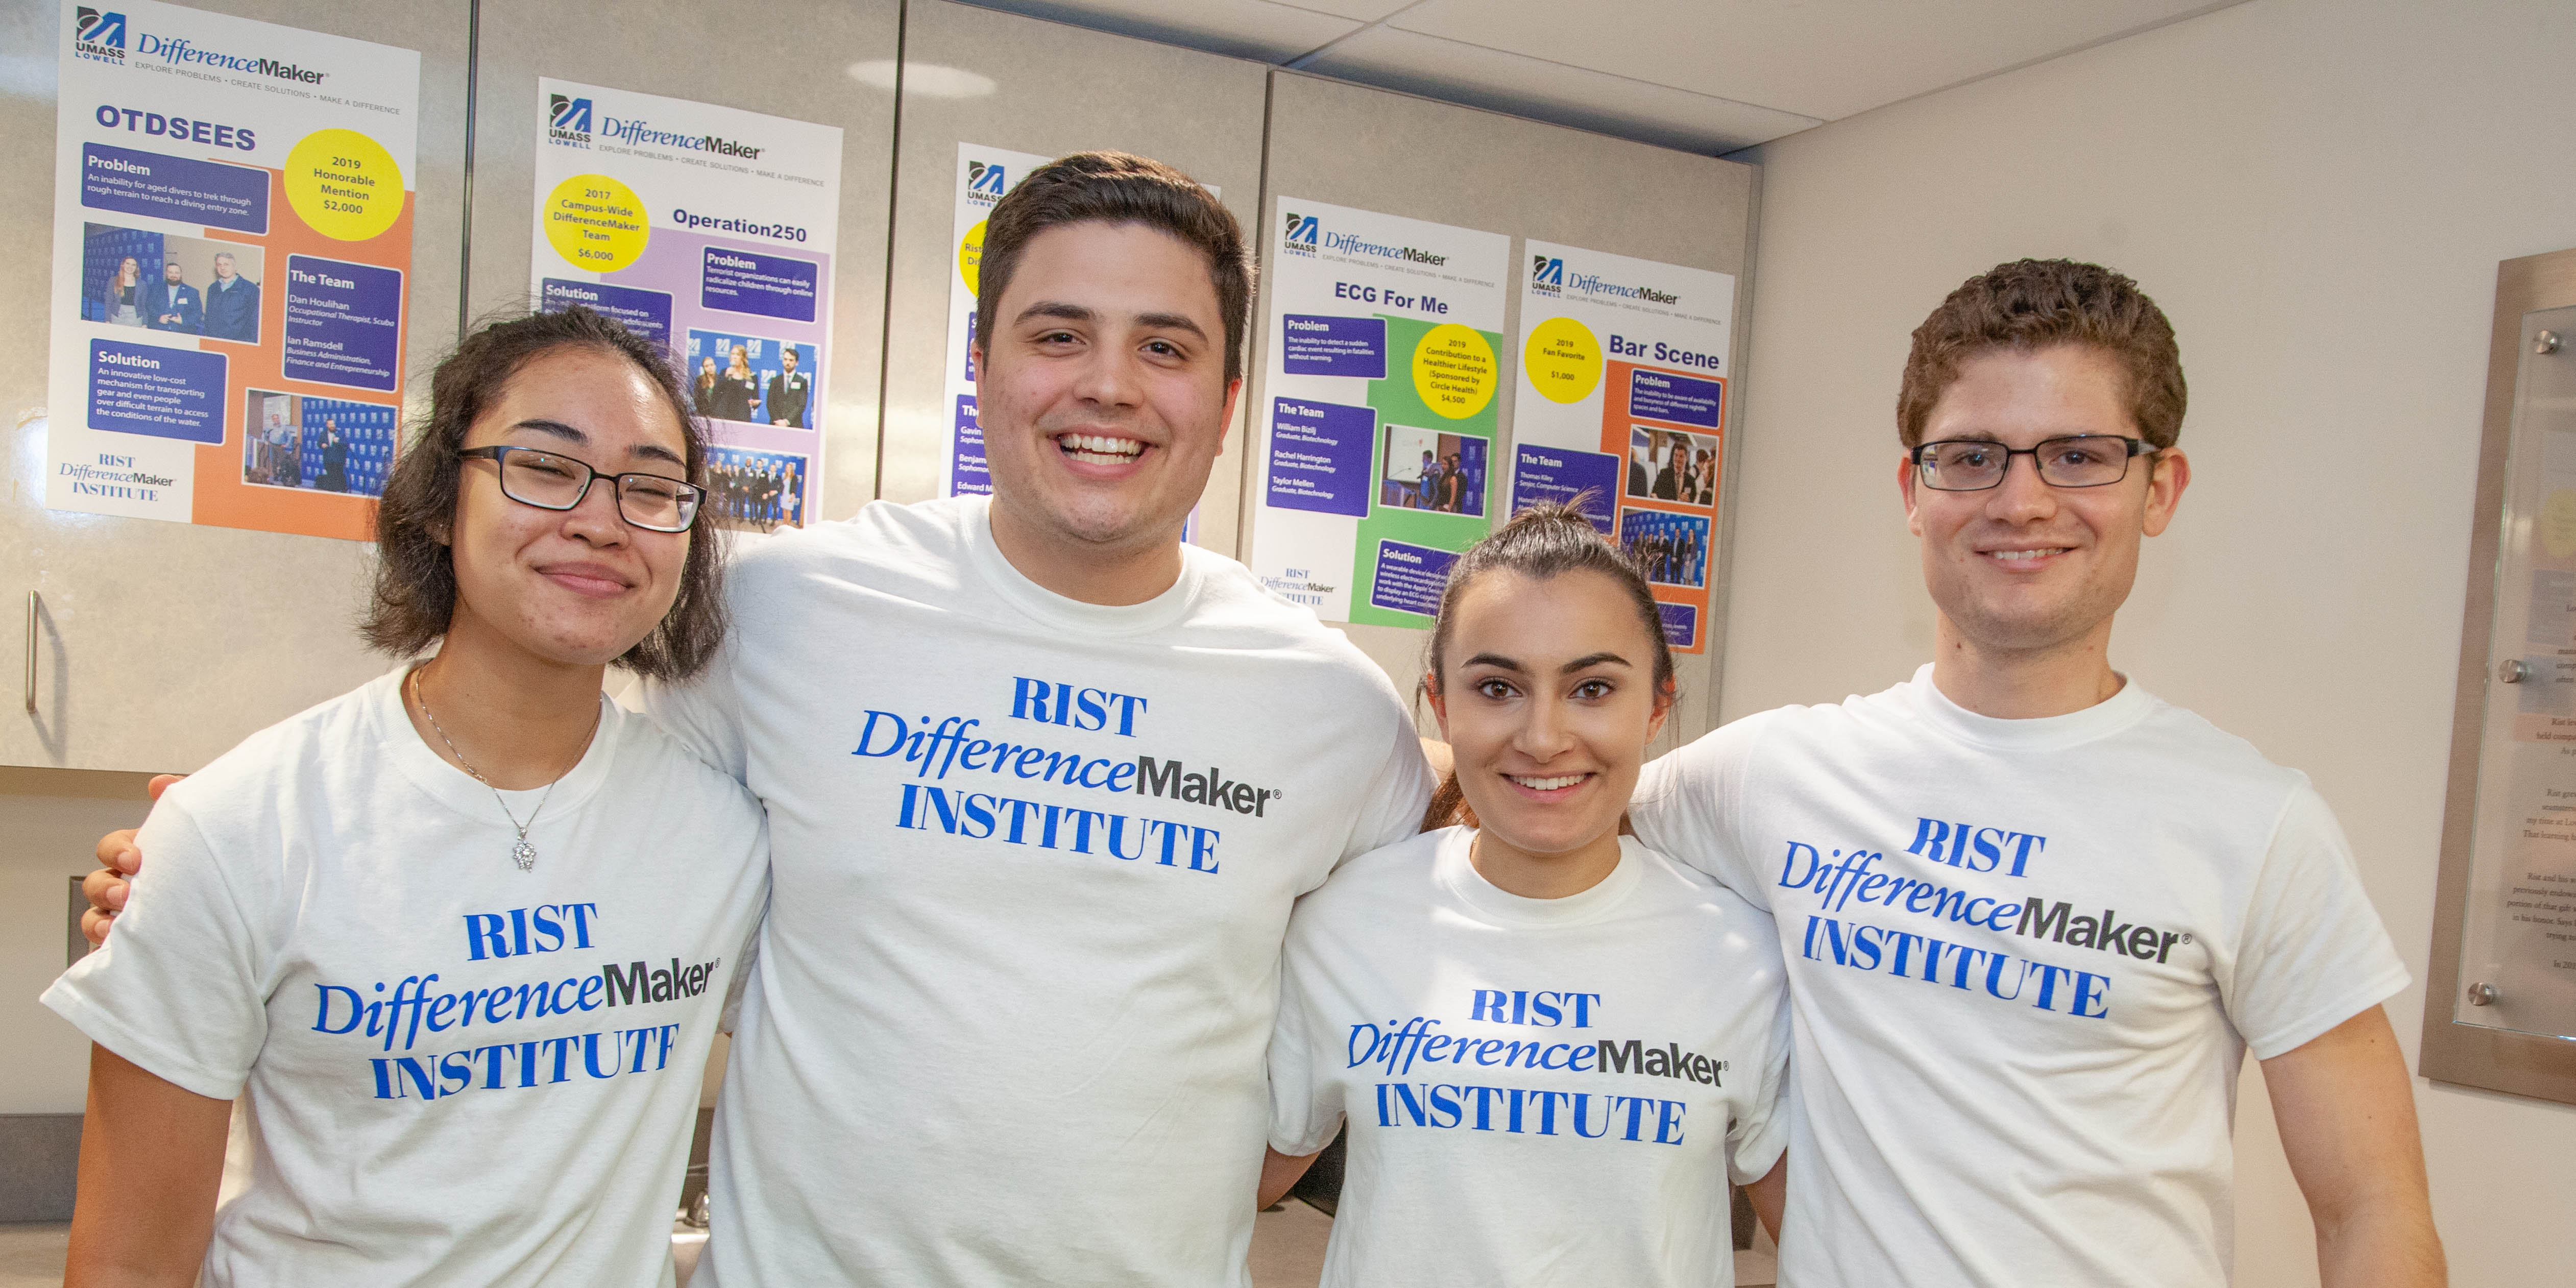 Group of four students wearing RIST DifferenceMaker Institute T-shirts